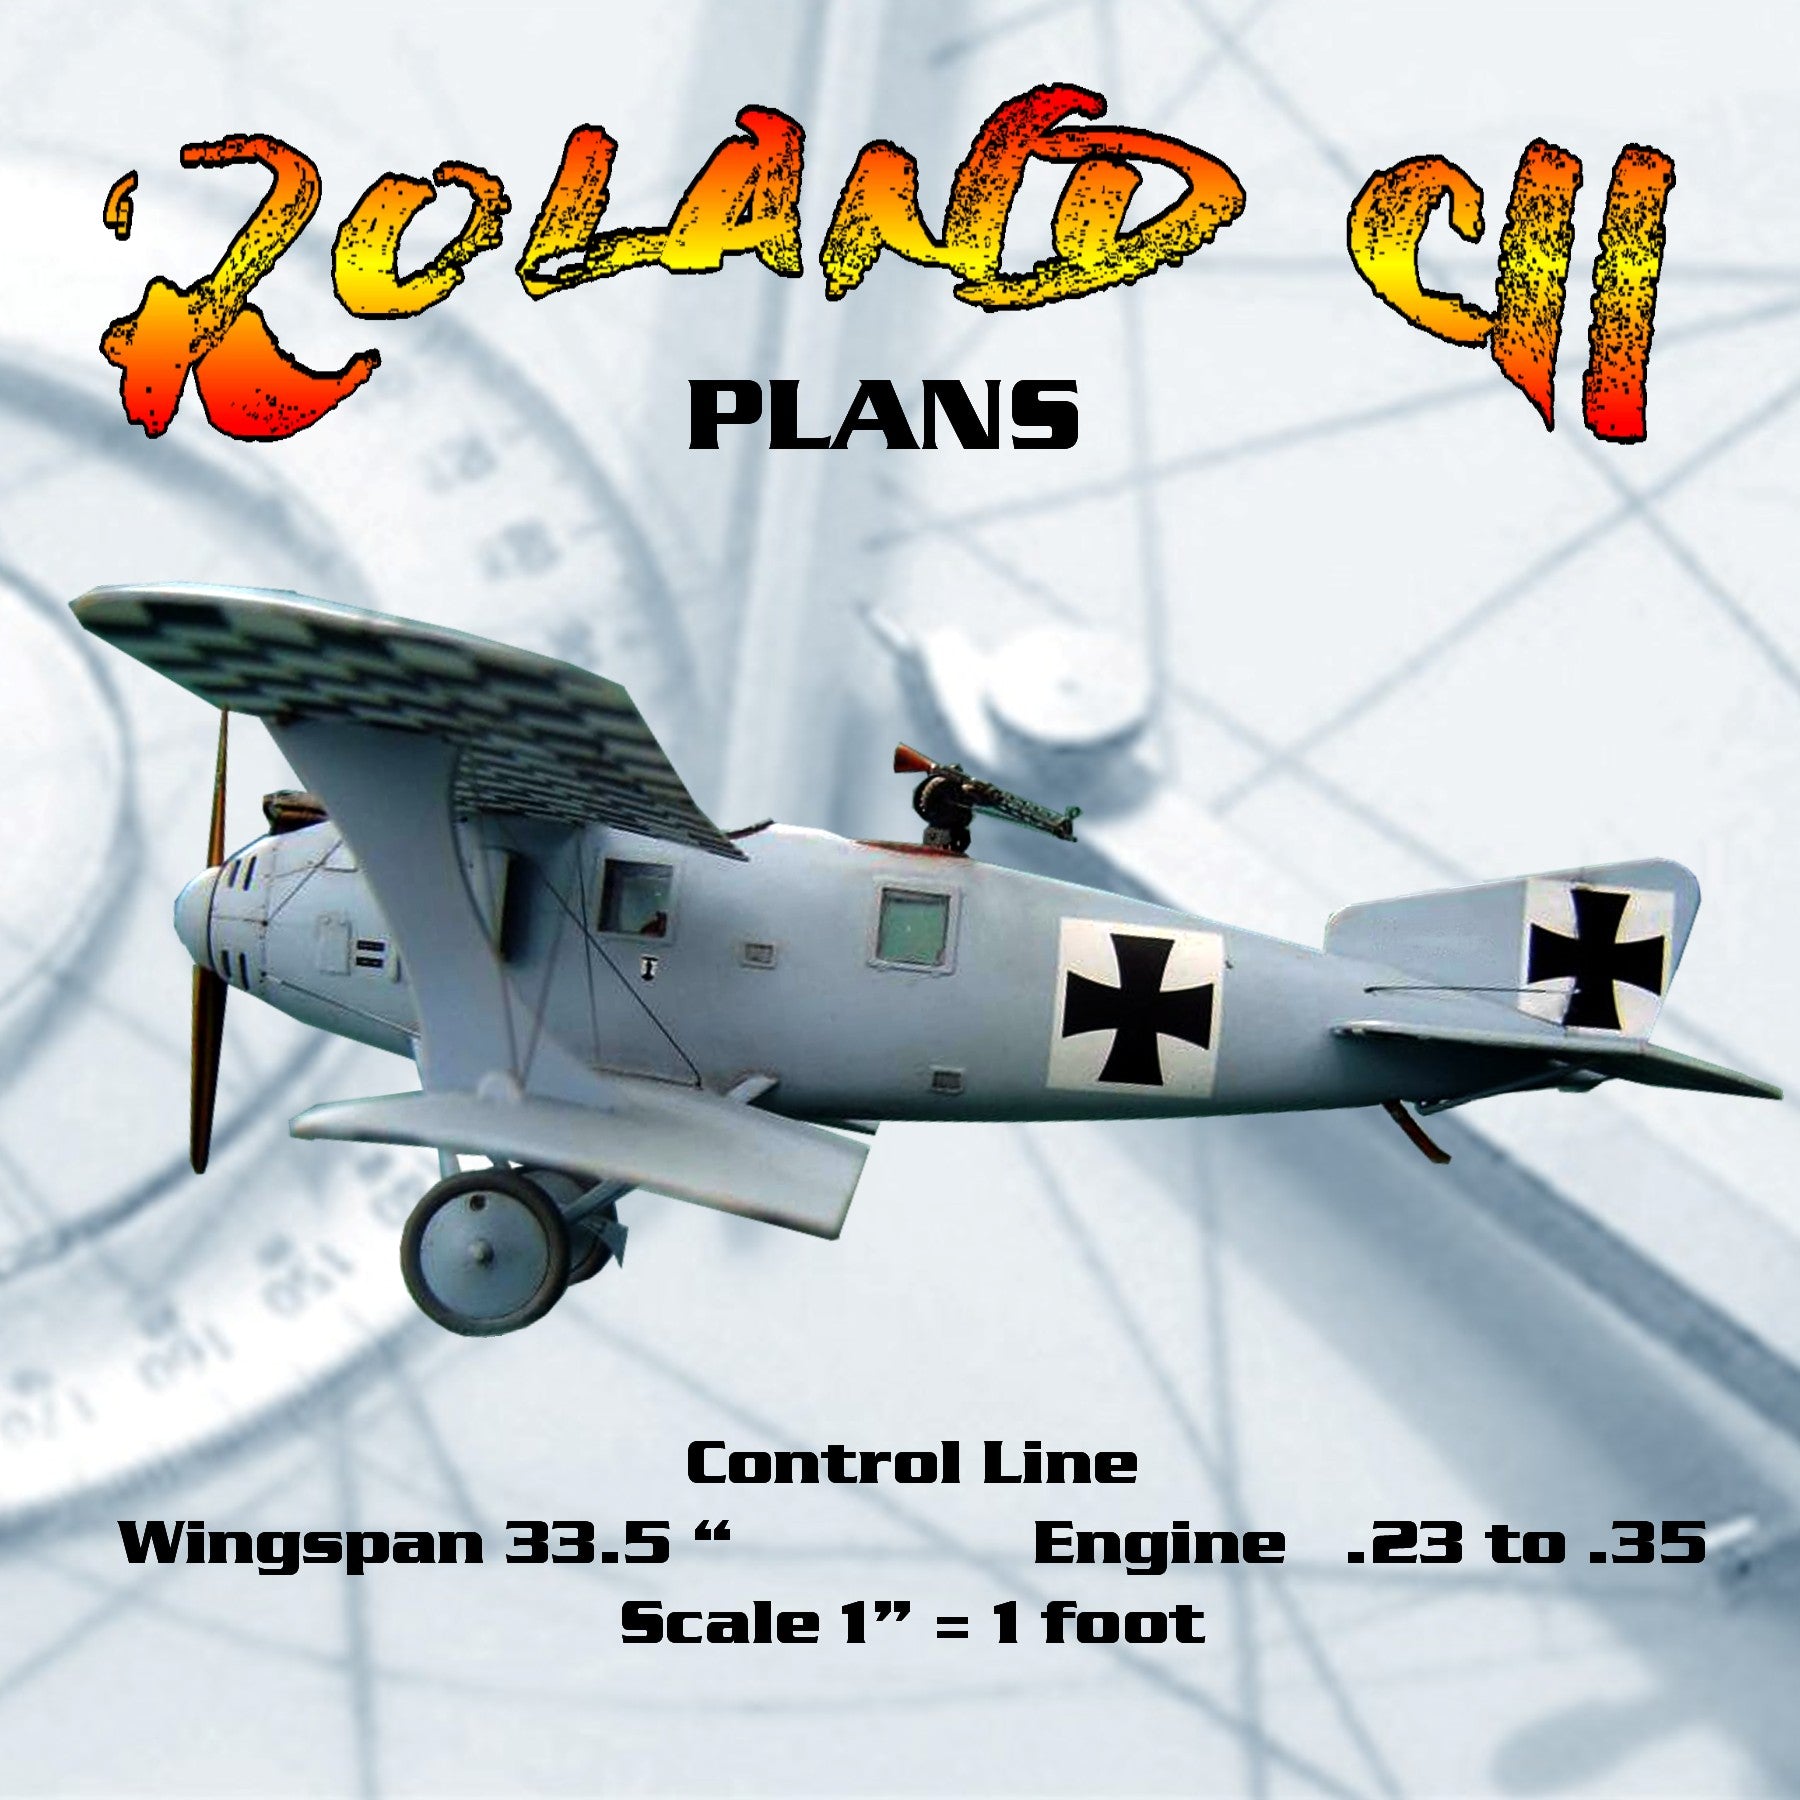 full size  plans  control line  scale 1” = 1' roland "wahlfisch" cii  wingspan 33.5 inches  engines .23 to .3